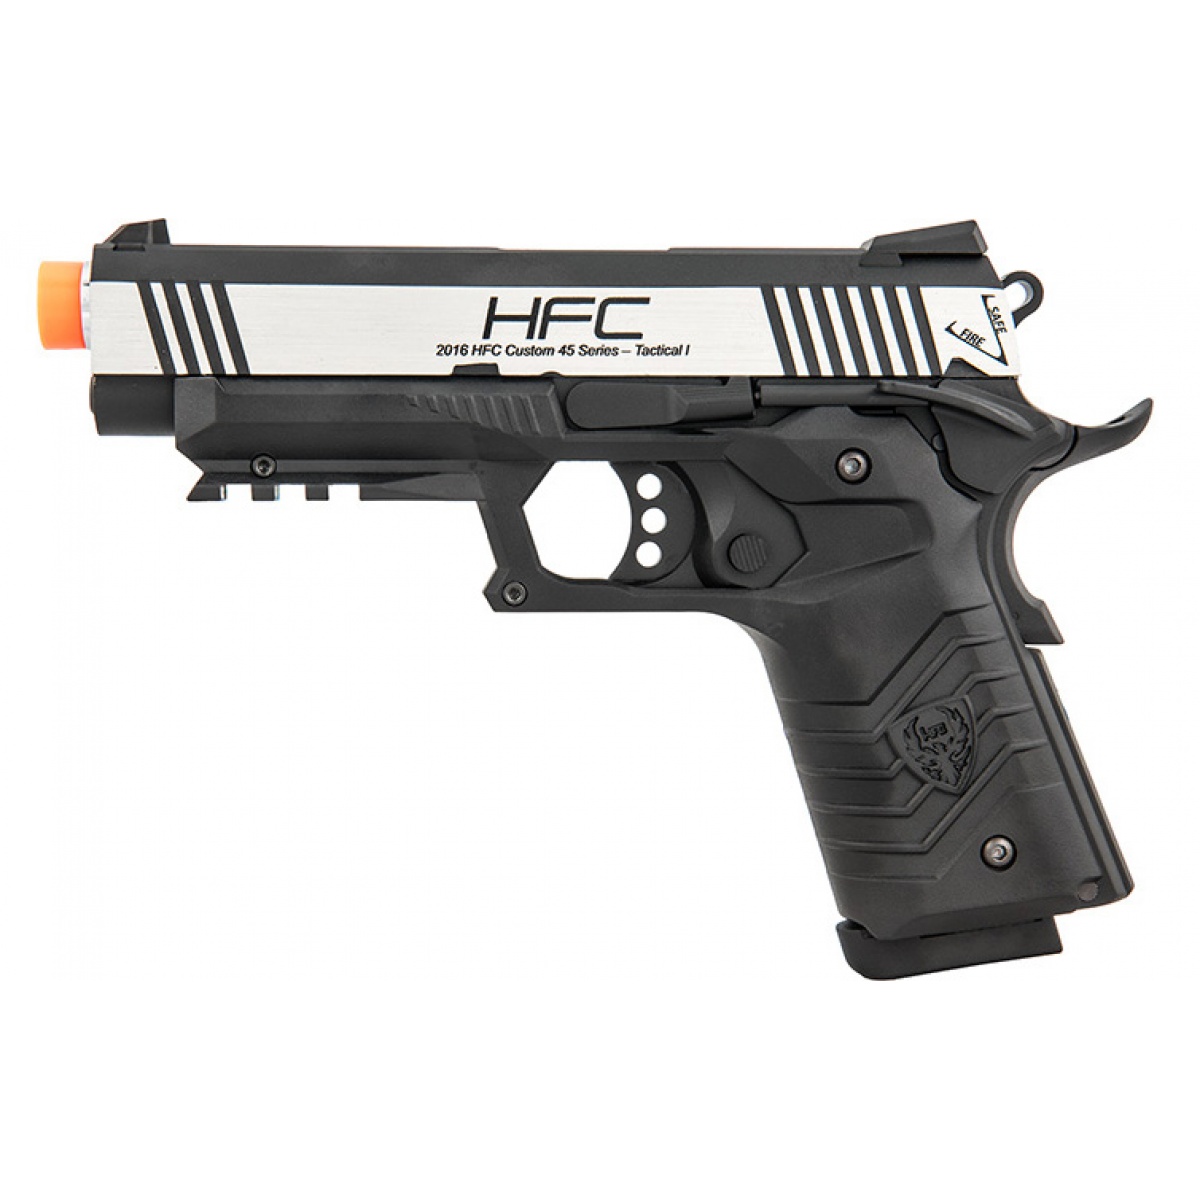 Details about   High Quality HFC Tactical 1911 CO2 Blowback Airsoft Gun BLACK 350 FPS/0.2G BB 